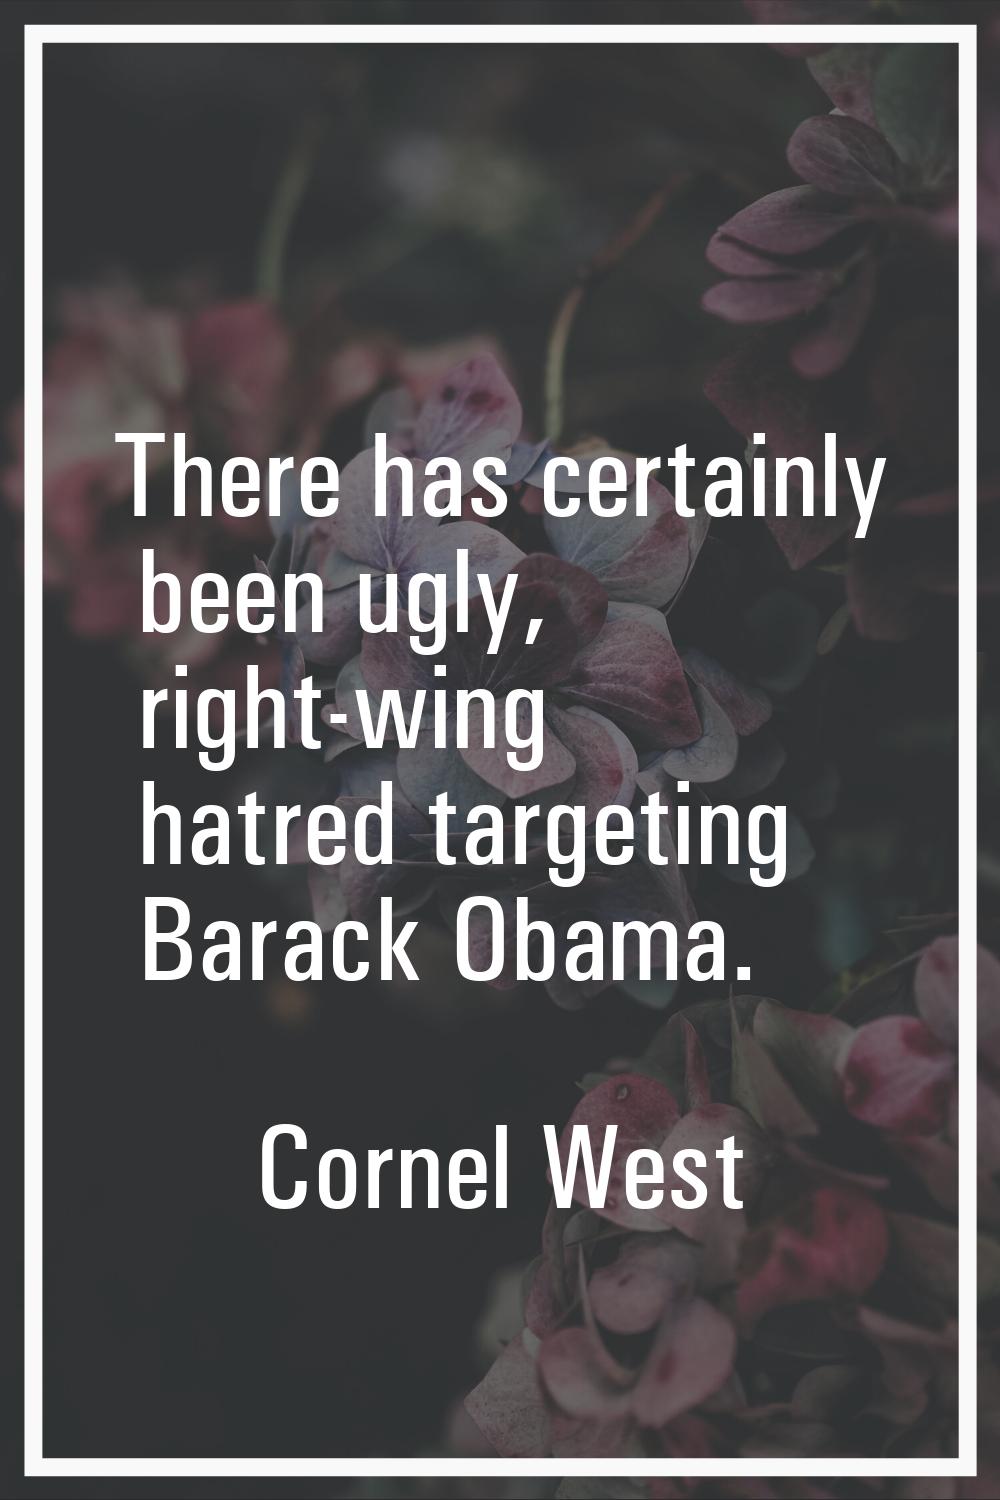 There has certainly been ugly, right-wing hatred targeting Barack Obama.